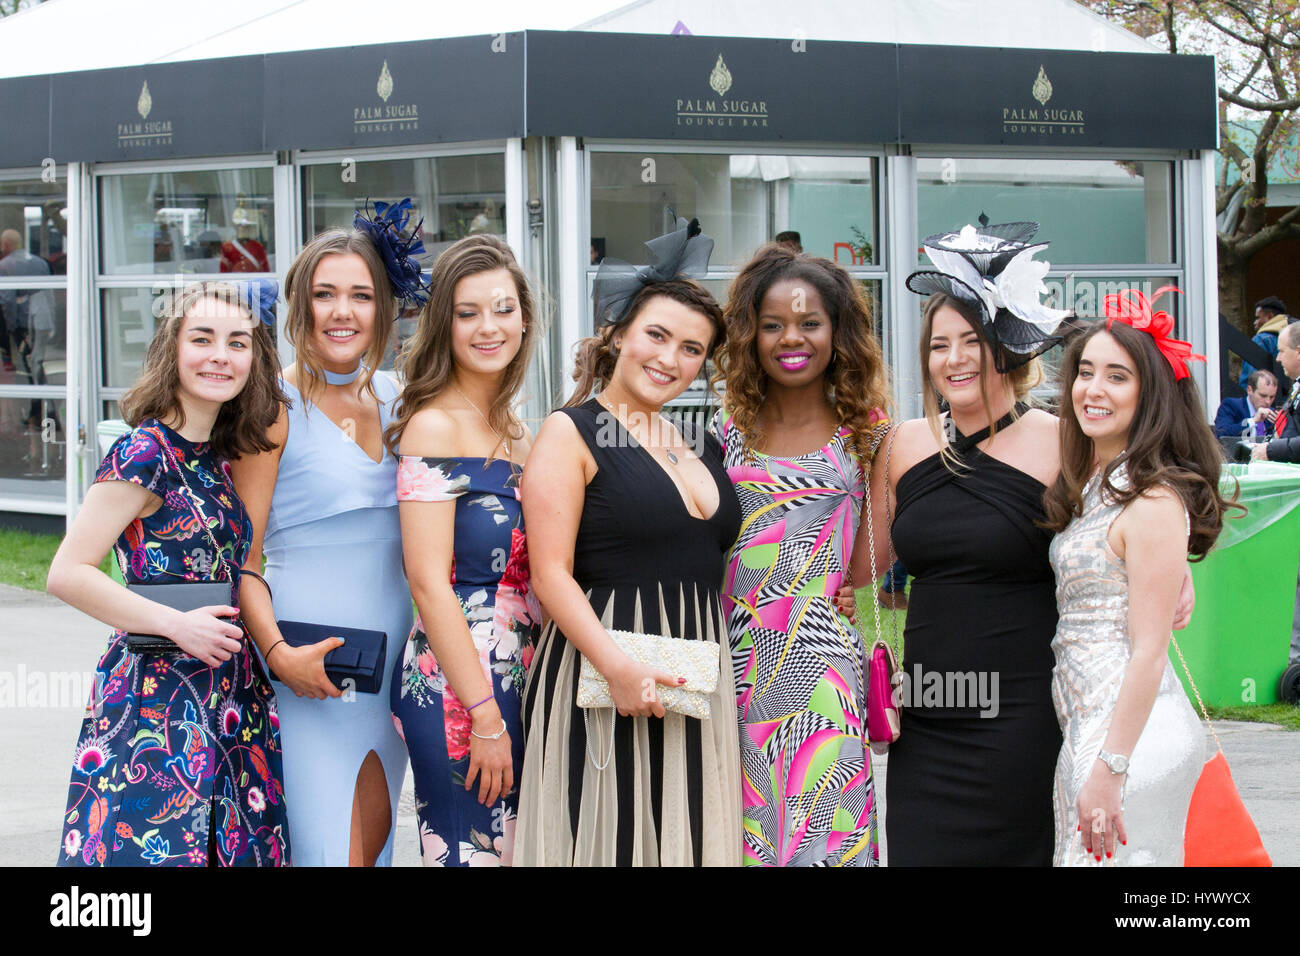 Racegoers' female fashions, high-fashion clothing, stylish, geek chic trendy, formal ladies frocks, haute couture dresses and fashionistas in Liverpool, Merseyside, UK April 2017. Grand National Ladies Day at Aintree. In light of previous years, when attendee’s outfits have got attention for all wrong reasons, officials at the Grand National urged this year's racegoers to 'smarten up' to make the event more 'aspirational'. Stock Photo